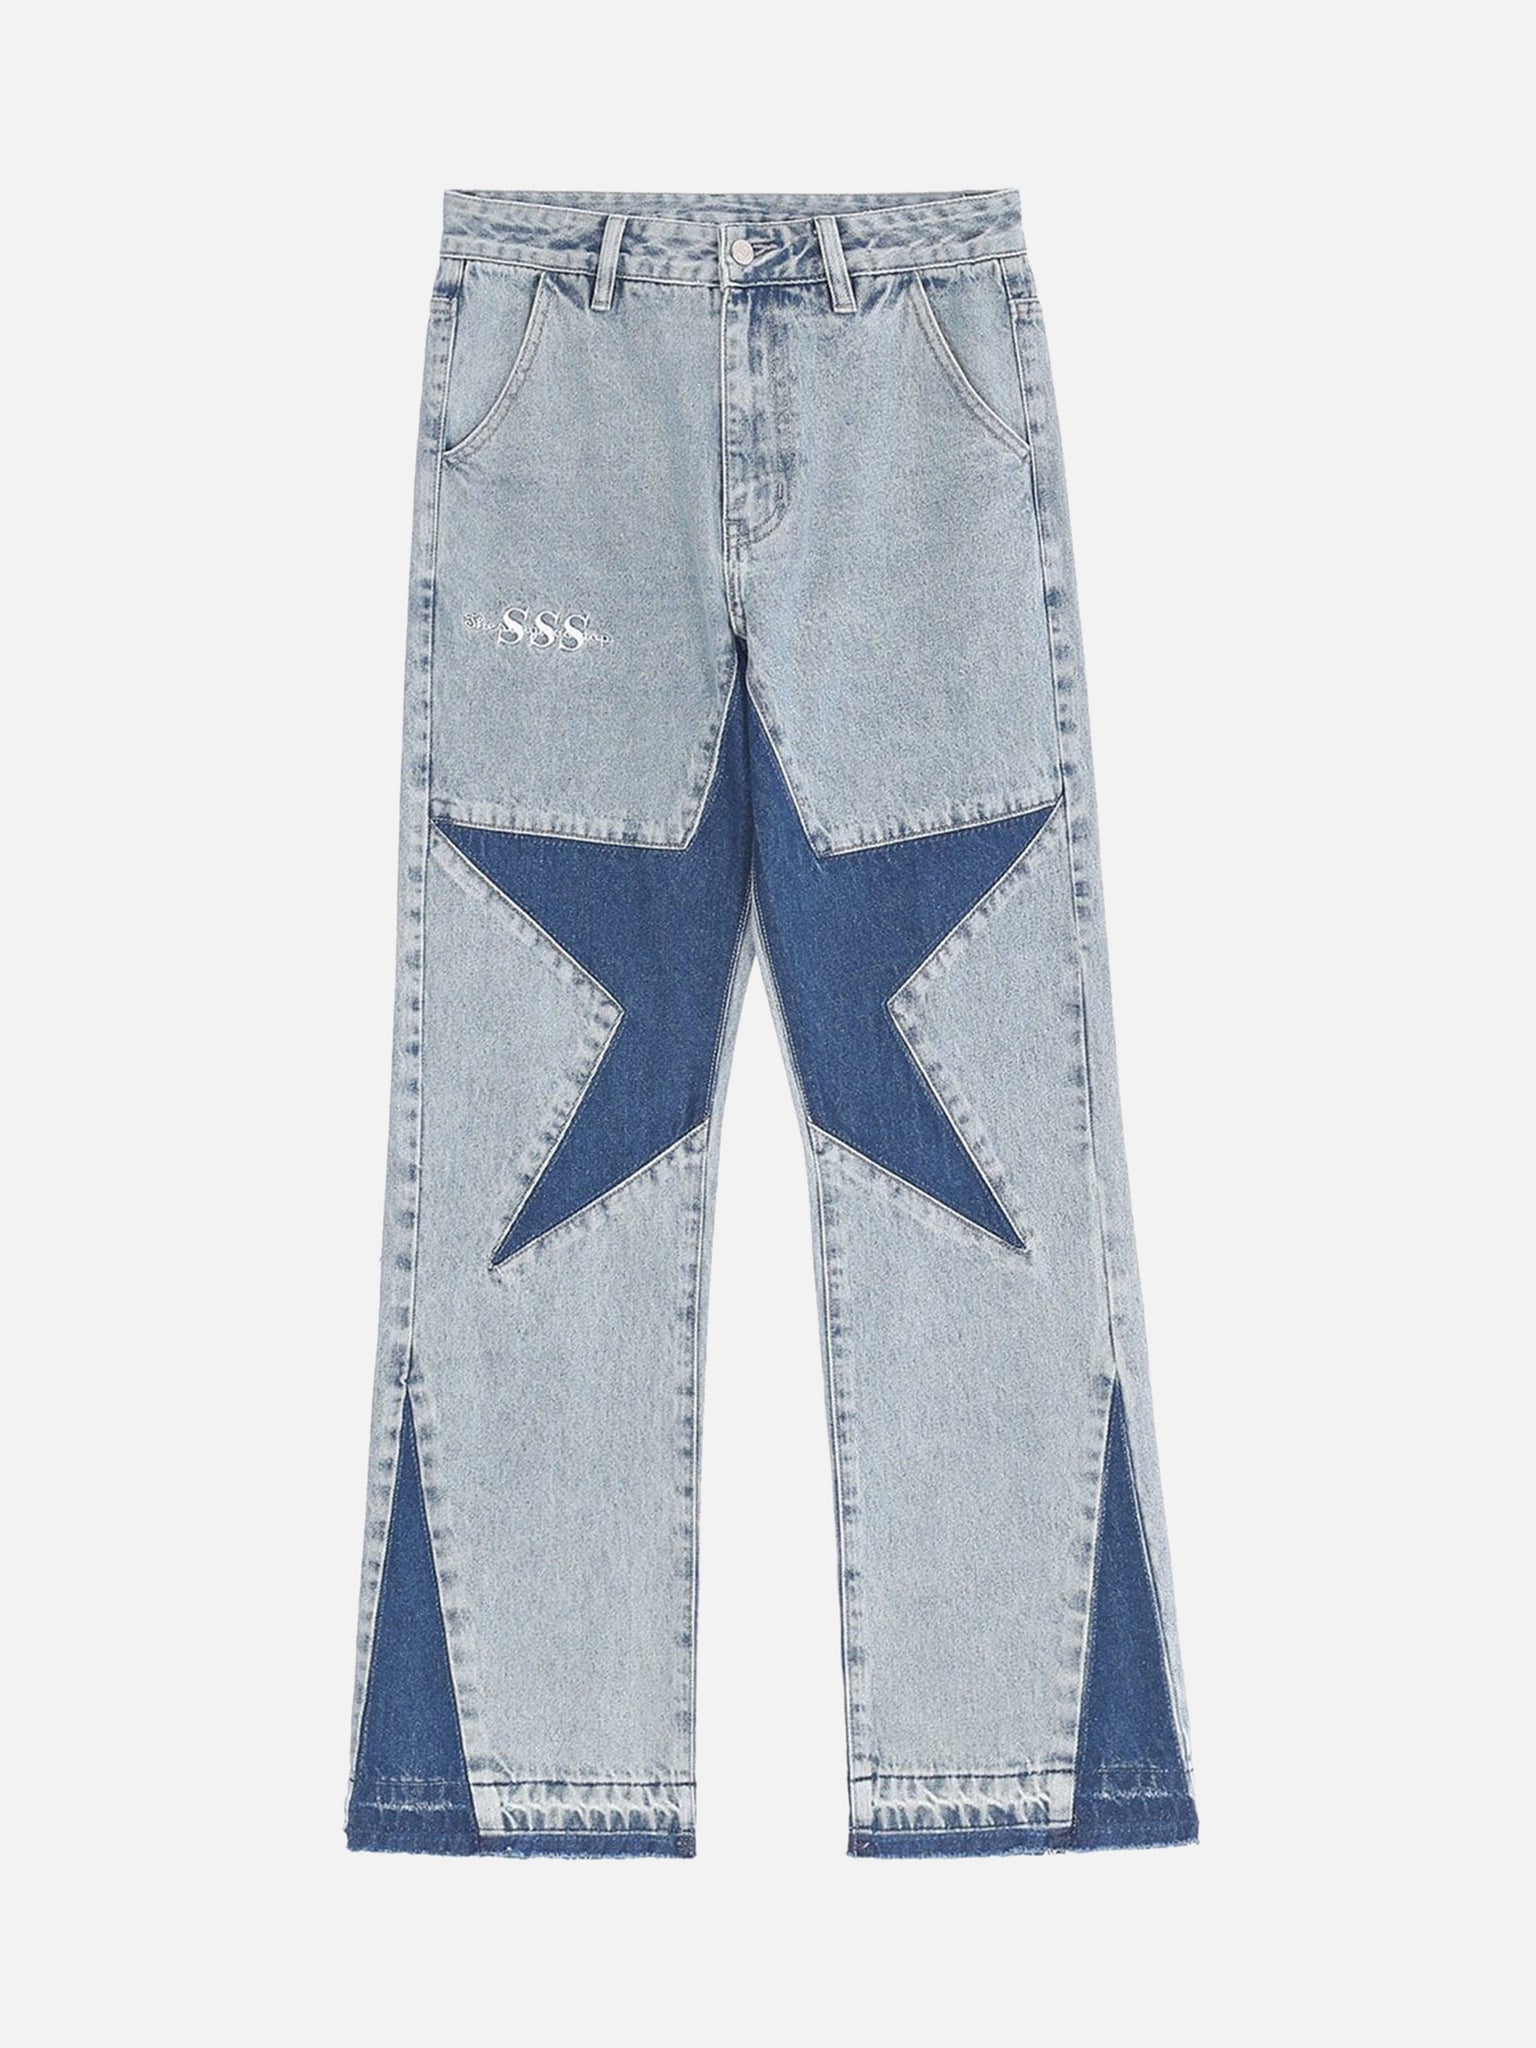 Thesupermade Patchwork Forked Five-pointed Star Jeans -1259